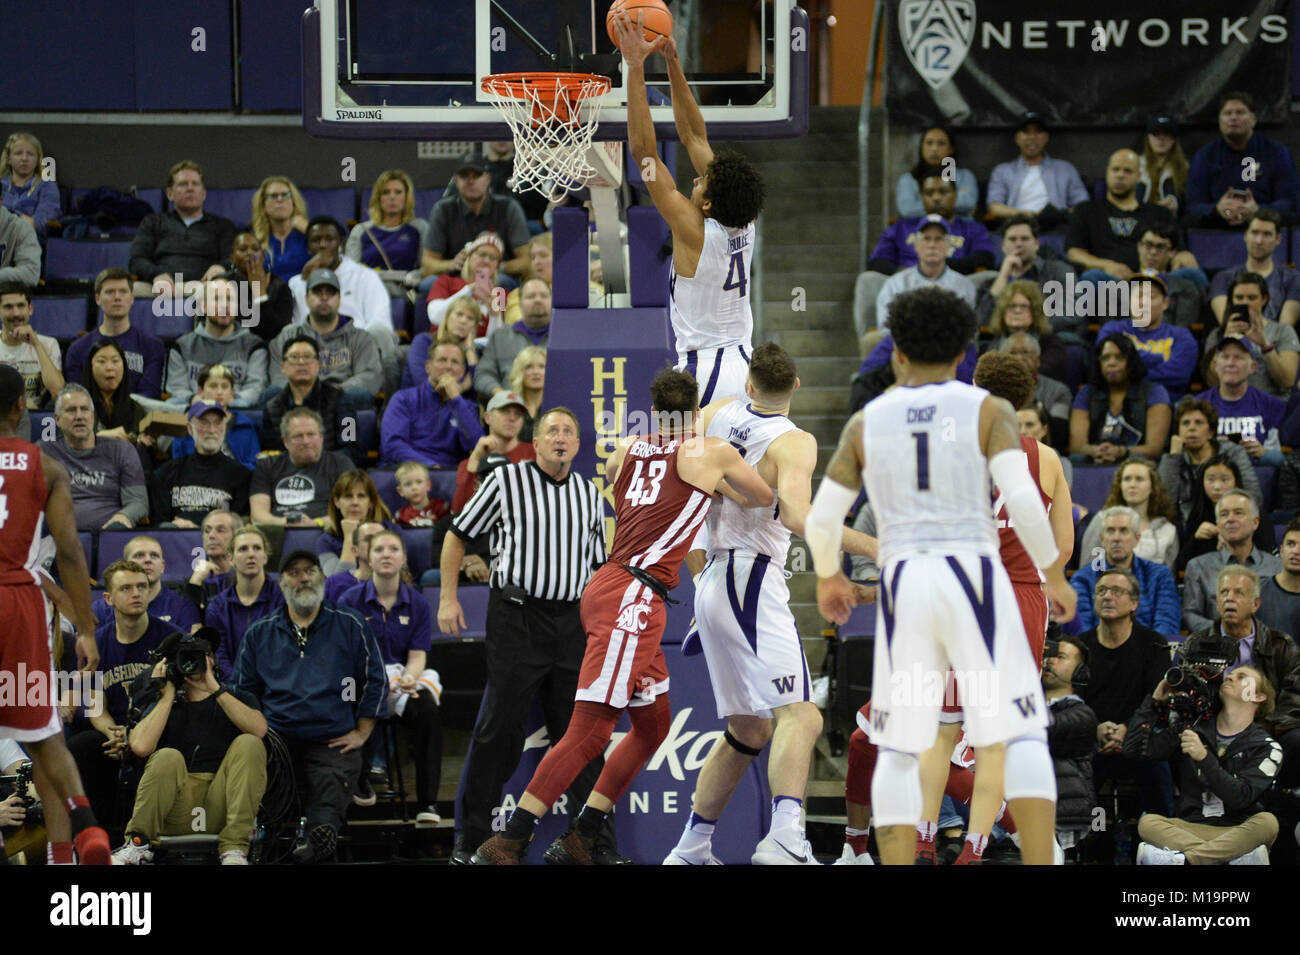 Seattle, WA, USA. 28th Jan, 2018. Matisse Thybulle (4) dunks for two of his 18 points during a PAC12 basketball game between the Washington Huskies and WSU Cougars. Washington won the game 80-62. The game was played at Hec Ed Pavilion in Seattle, WA. Jeff Halstead/CSM/Alamy Live News Stock Photo